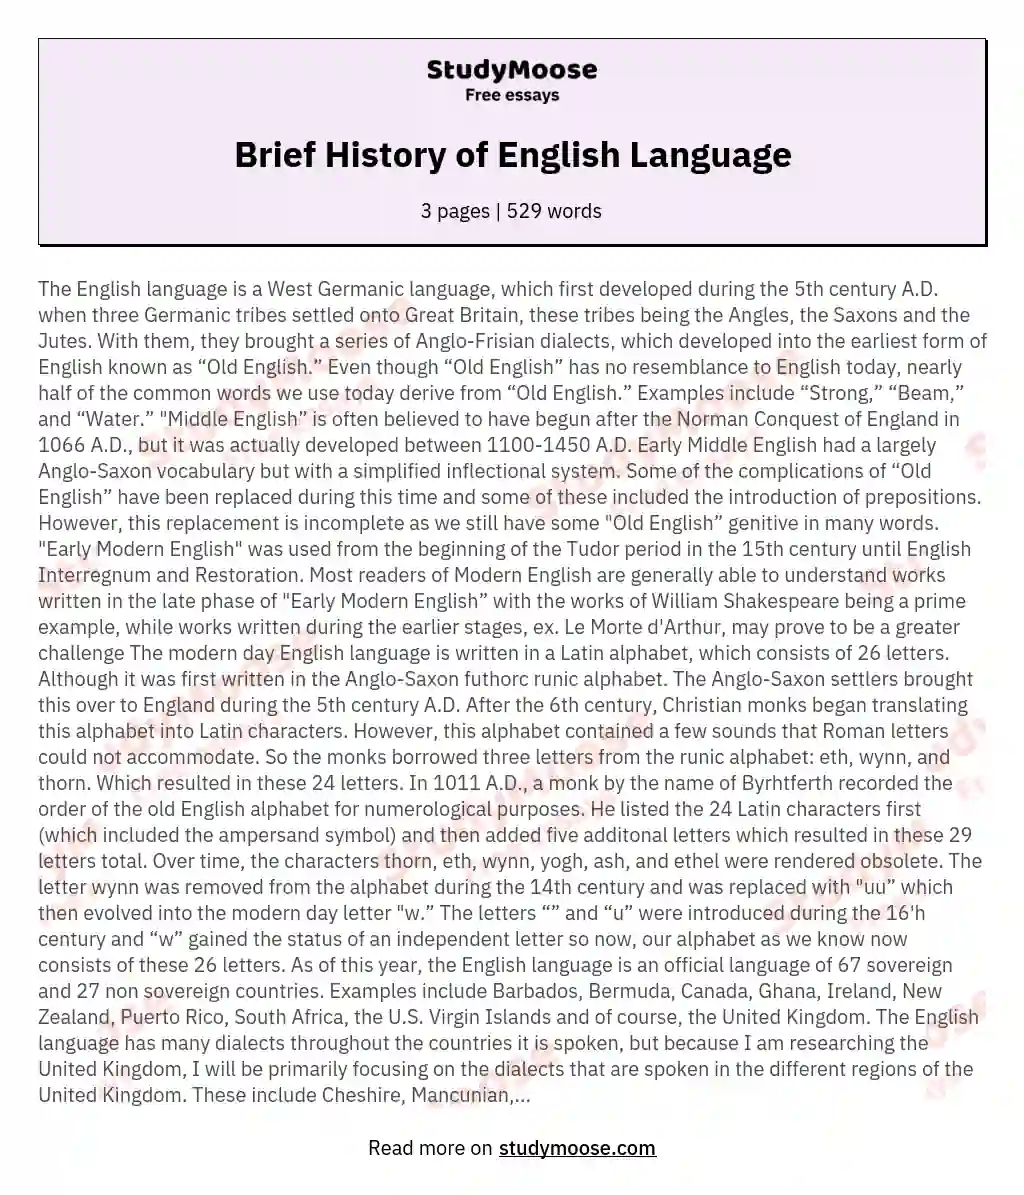 thesis statement of a brief history of english